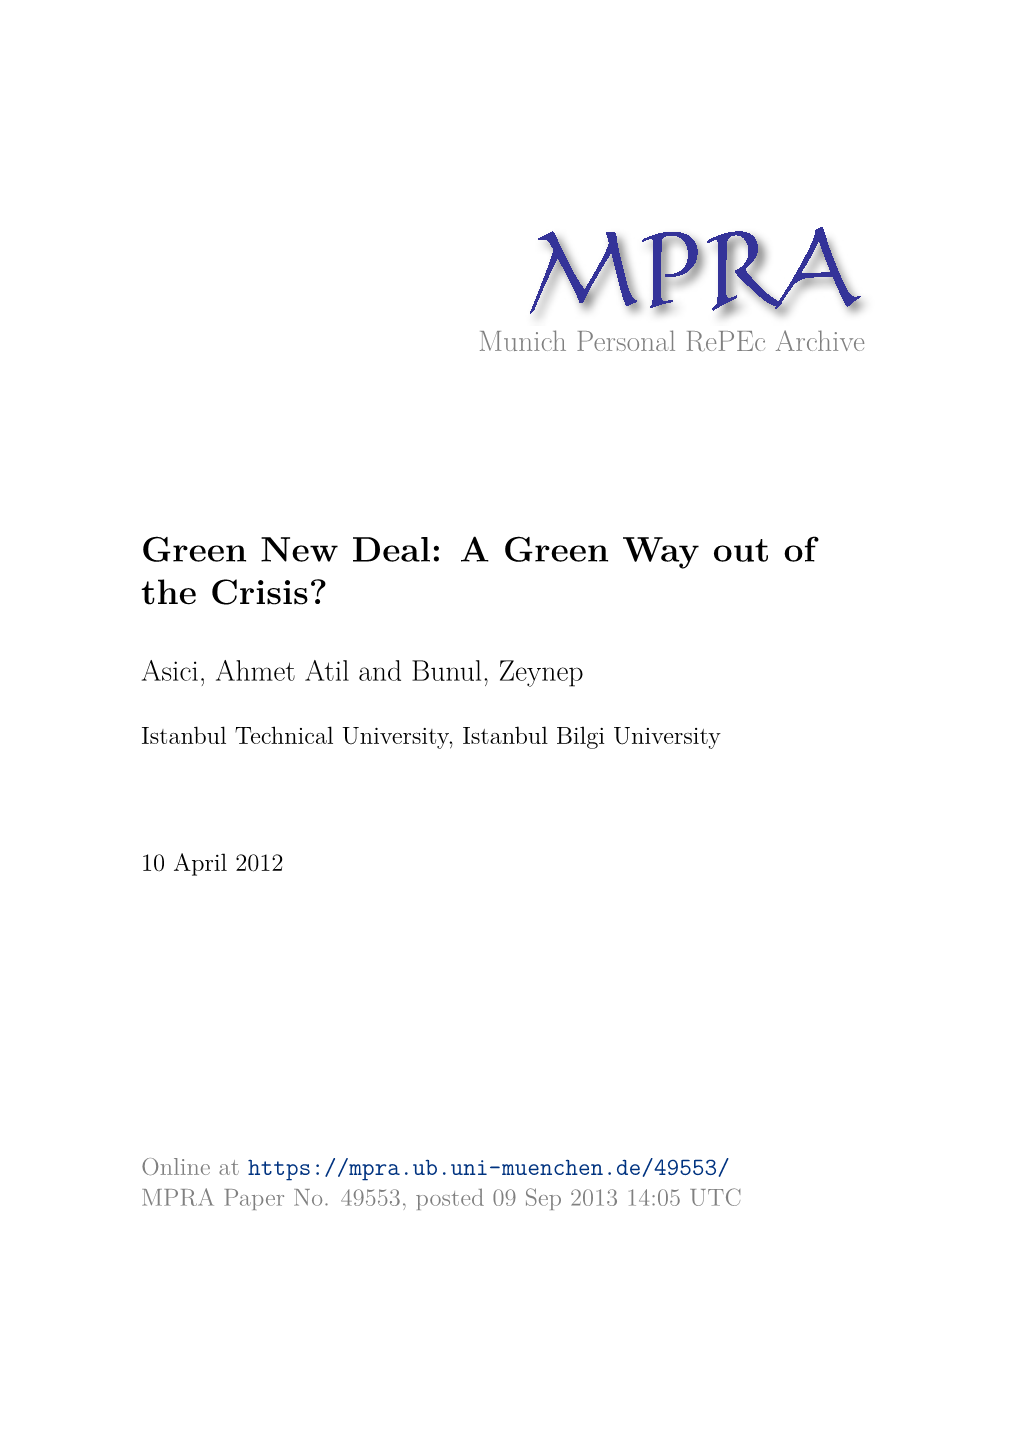 Green New Deal: a Green Way out of the Crisis?